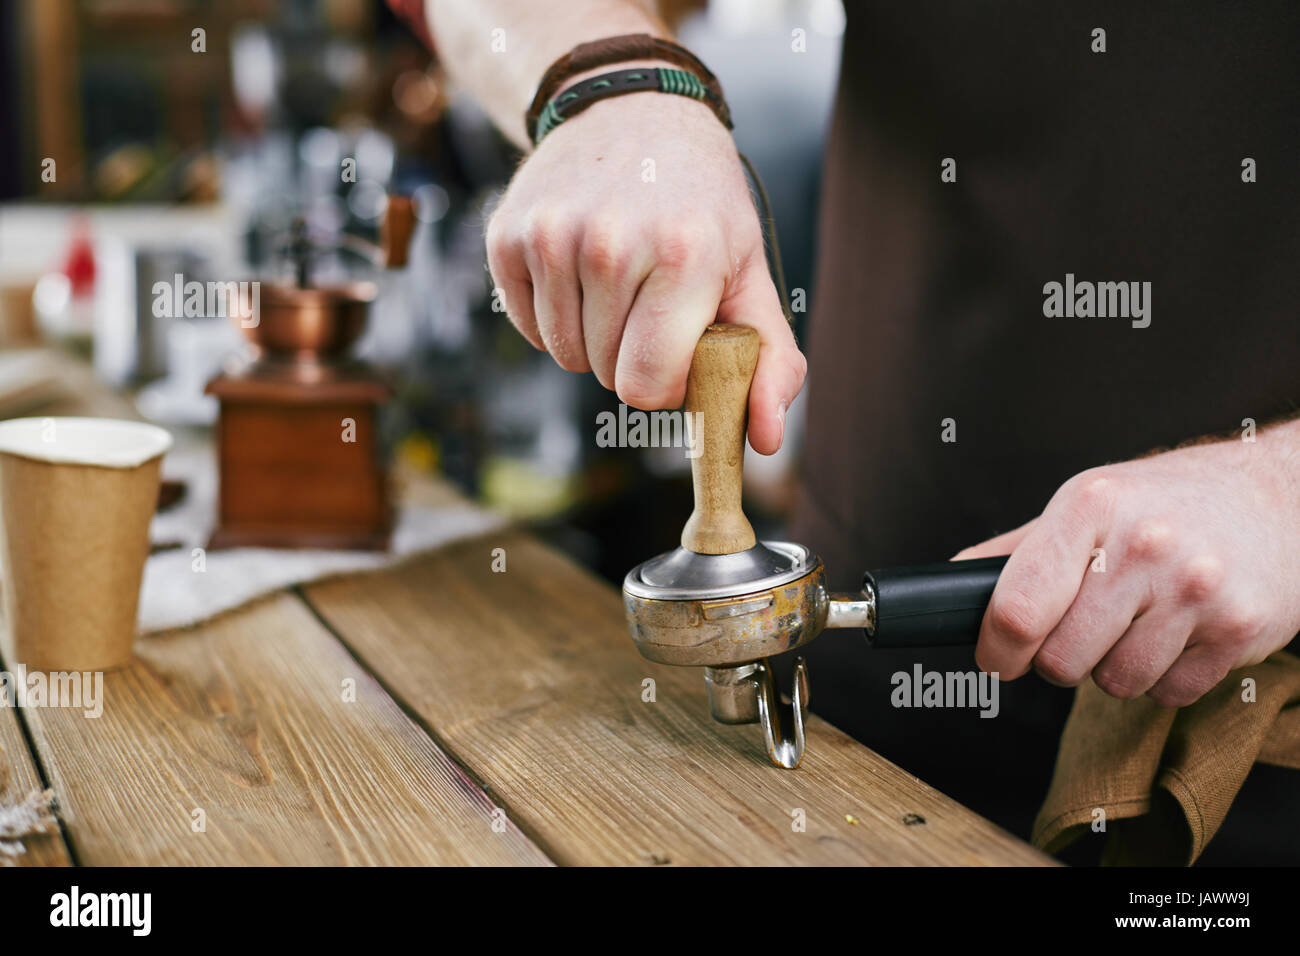 Masterful Barista Pressing Coffee Grains with Tamper Stock Photo